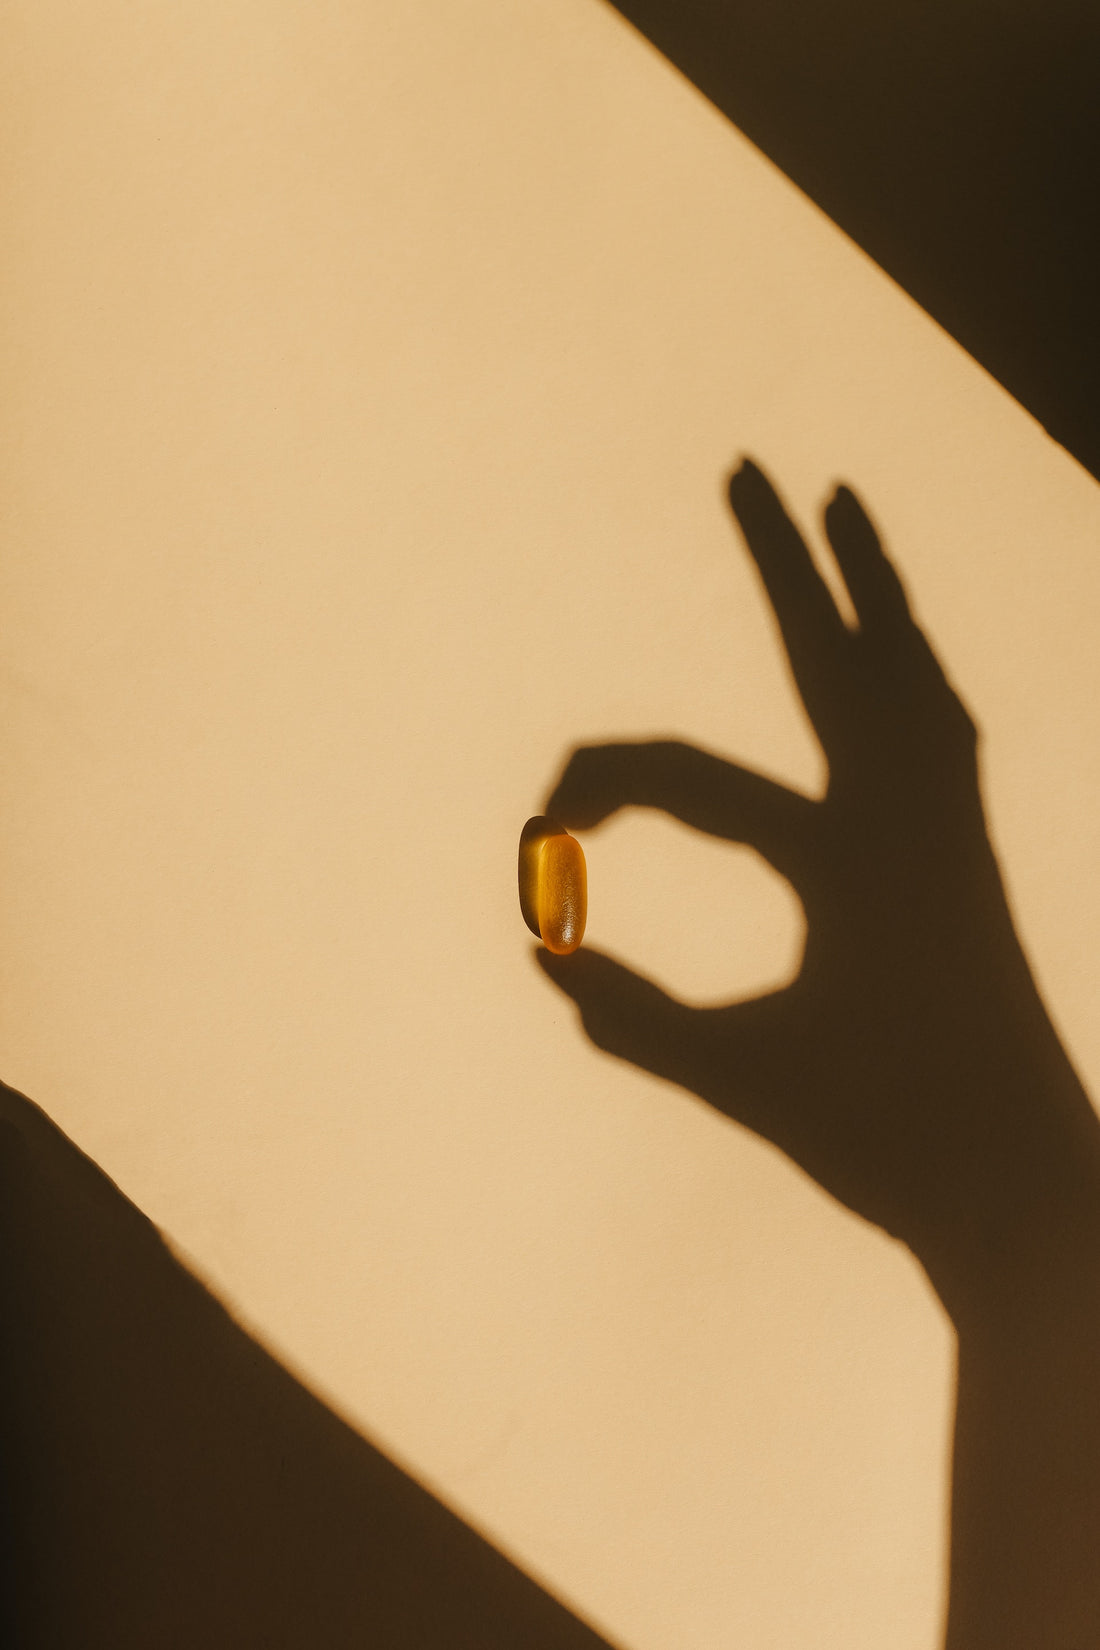 How fish oil supplements are hurting your health and hormones